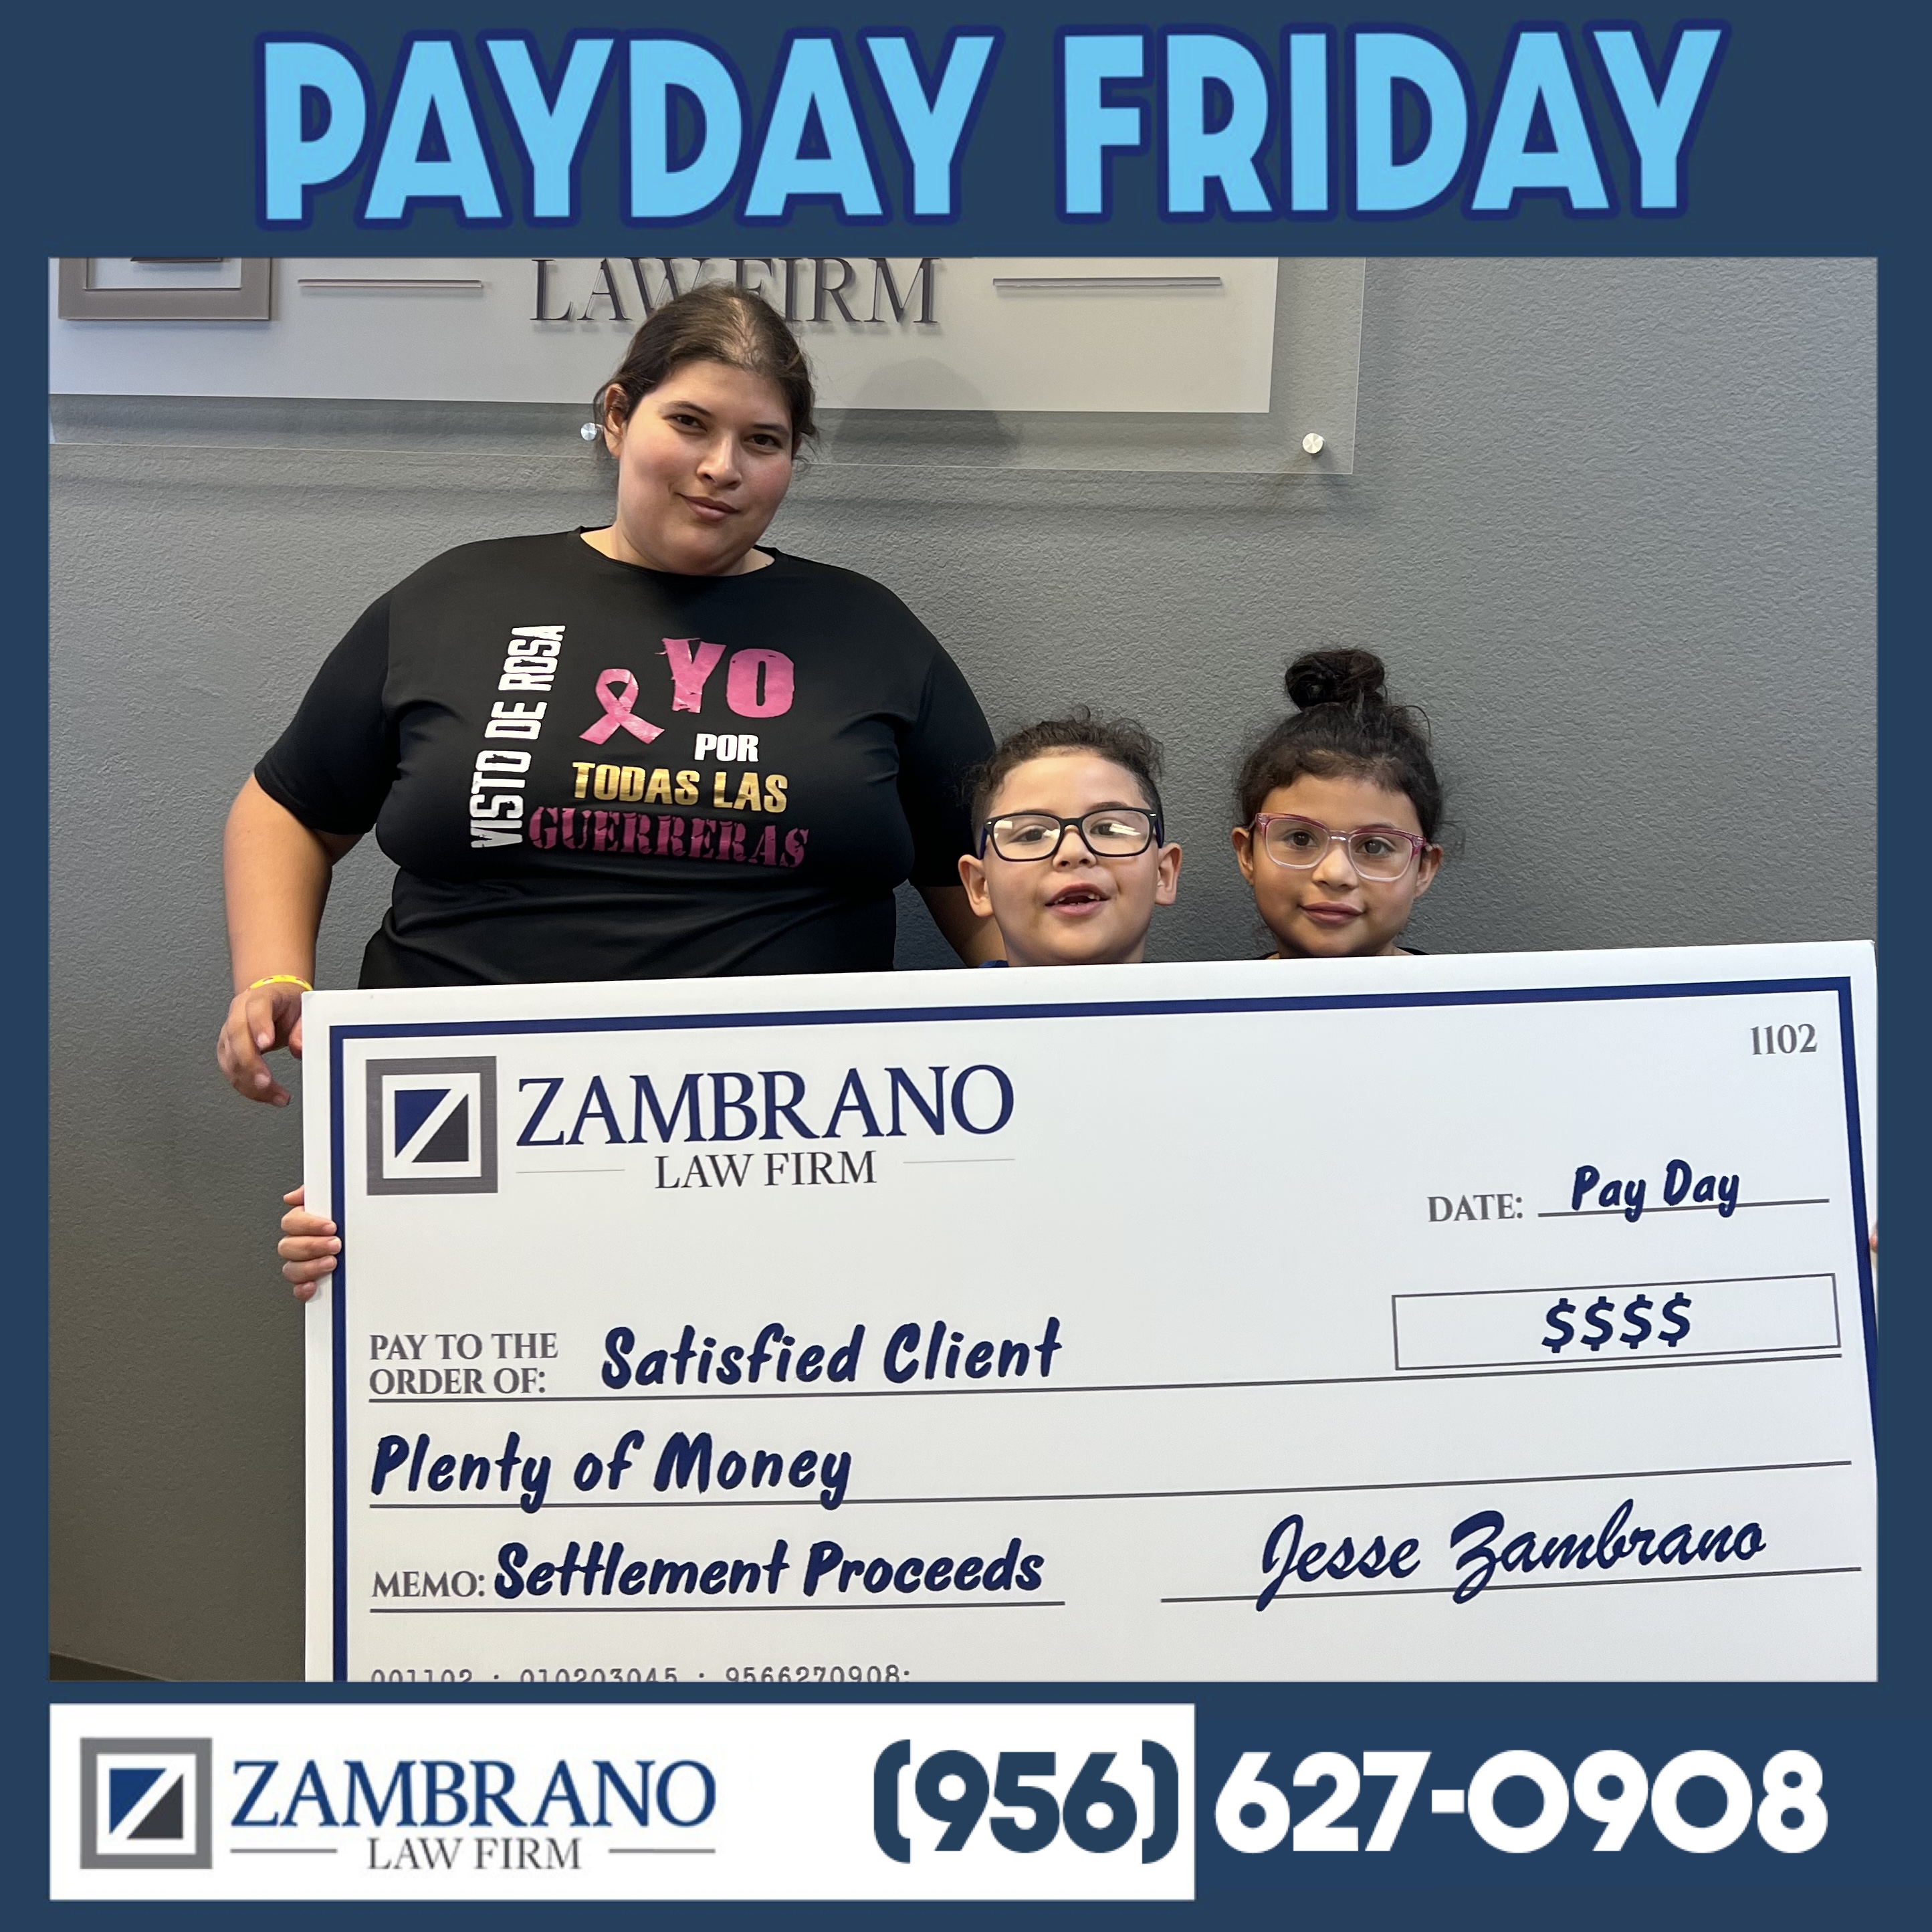 Pay Day Friday Celebration With Women and Two Children